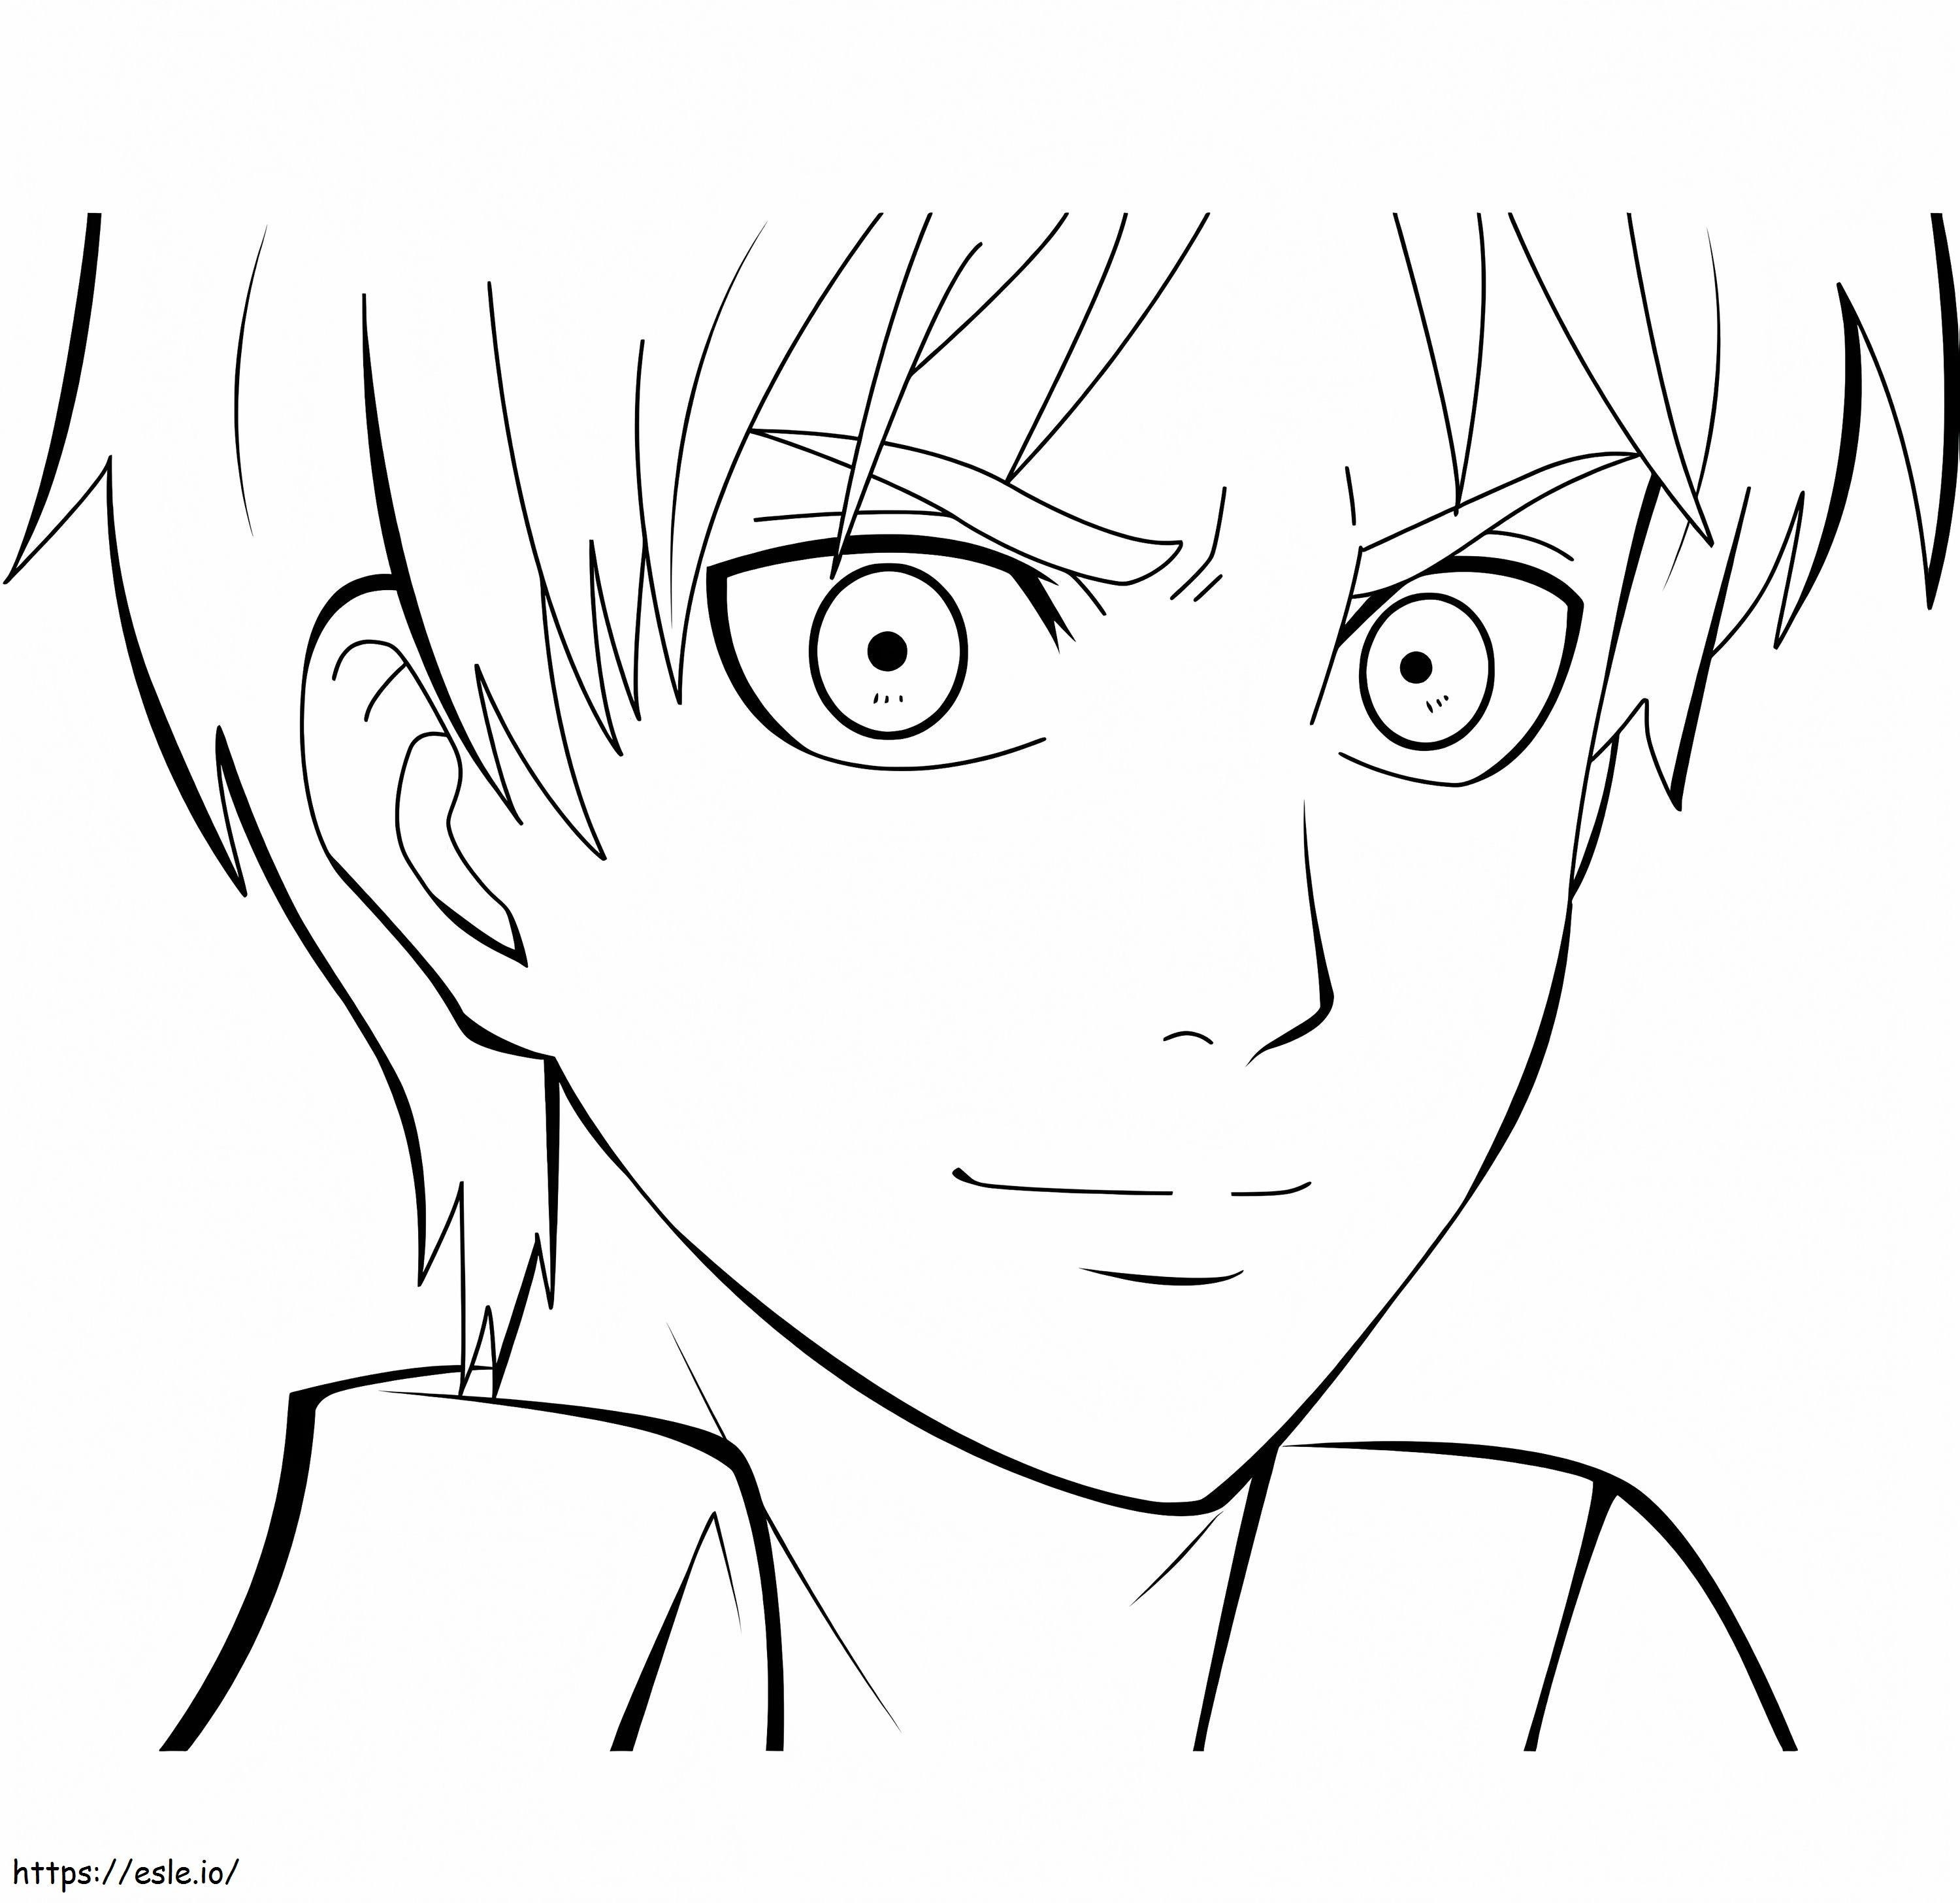 Levi Smiling coloring page